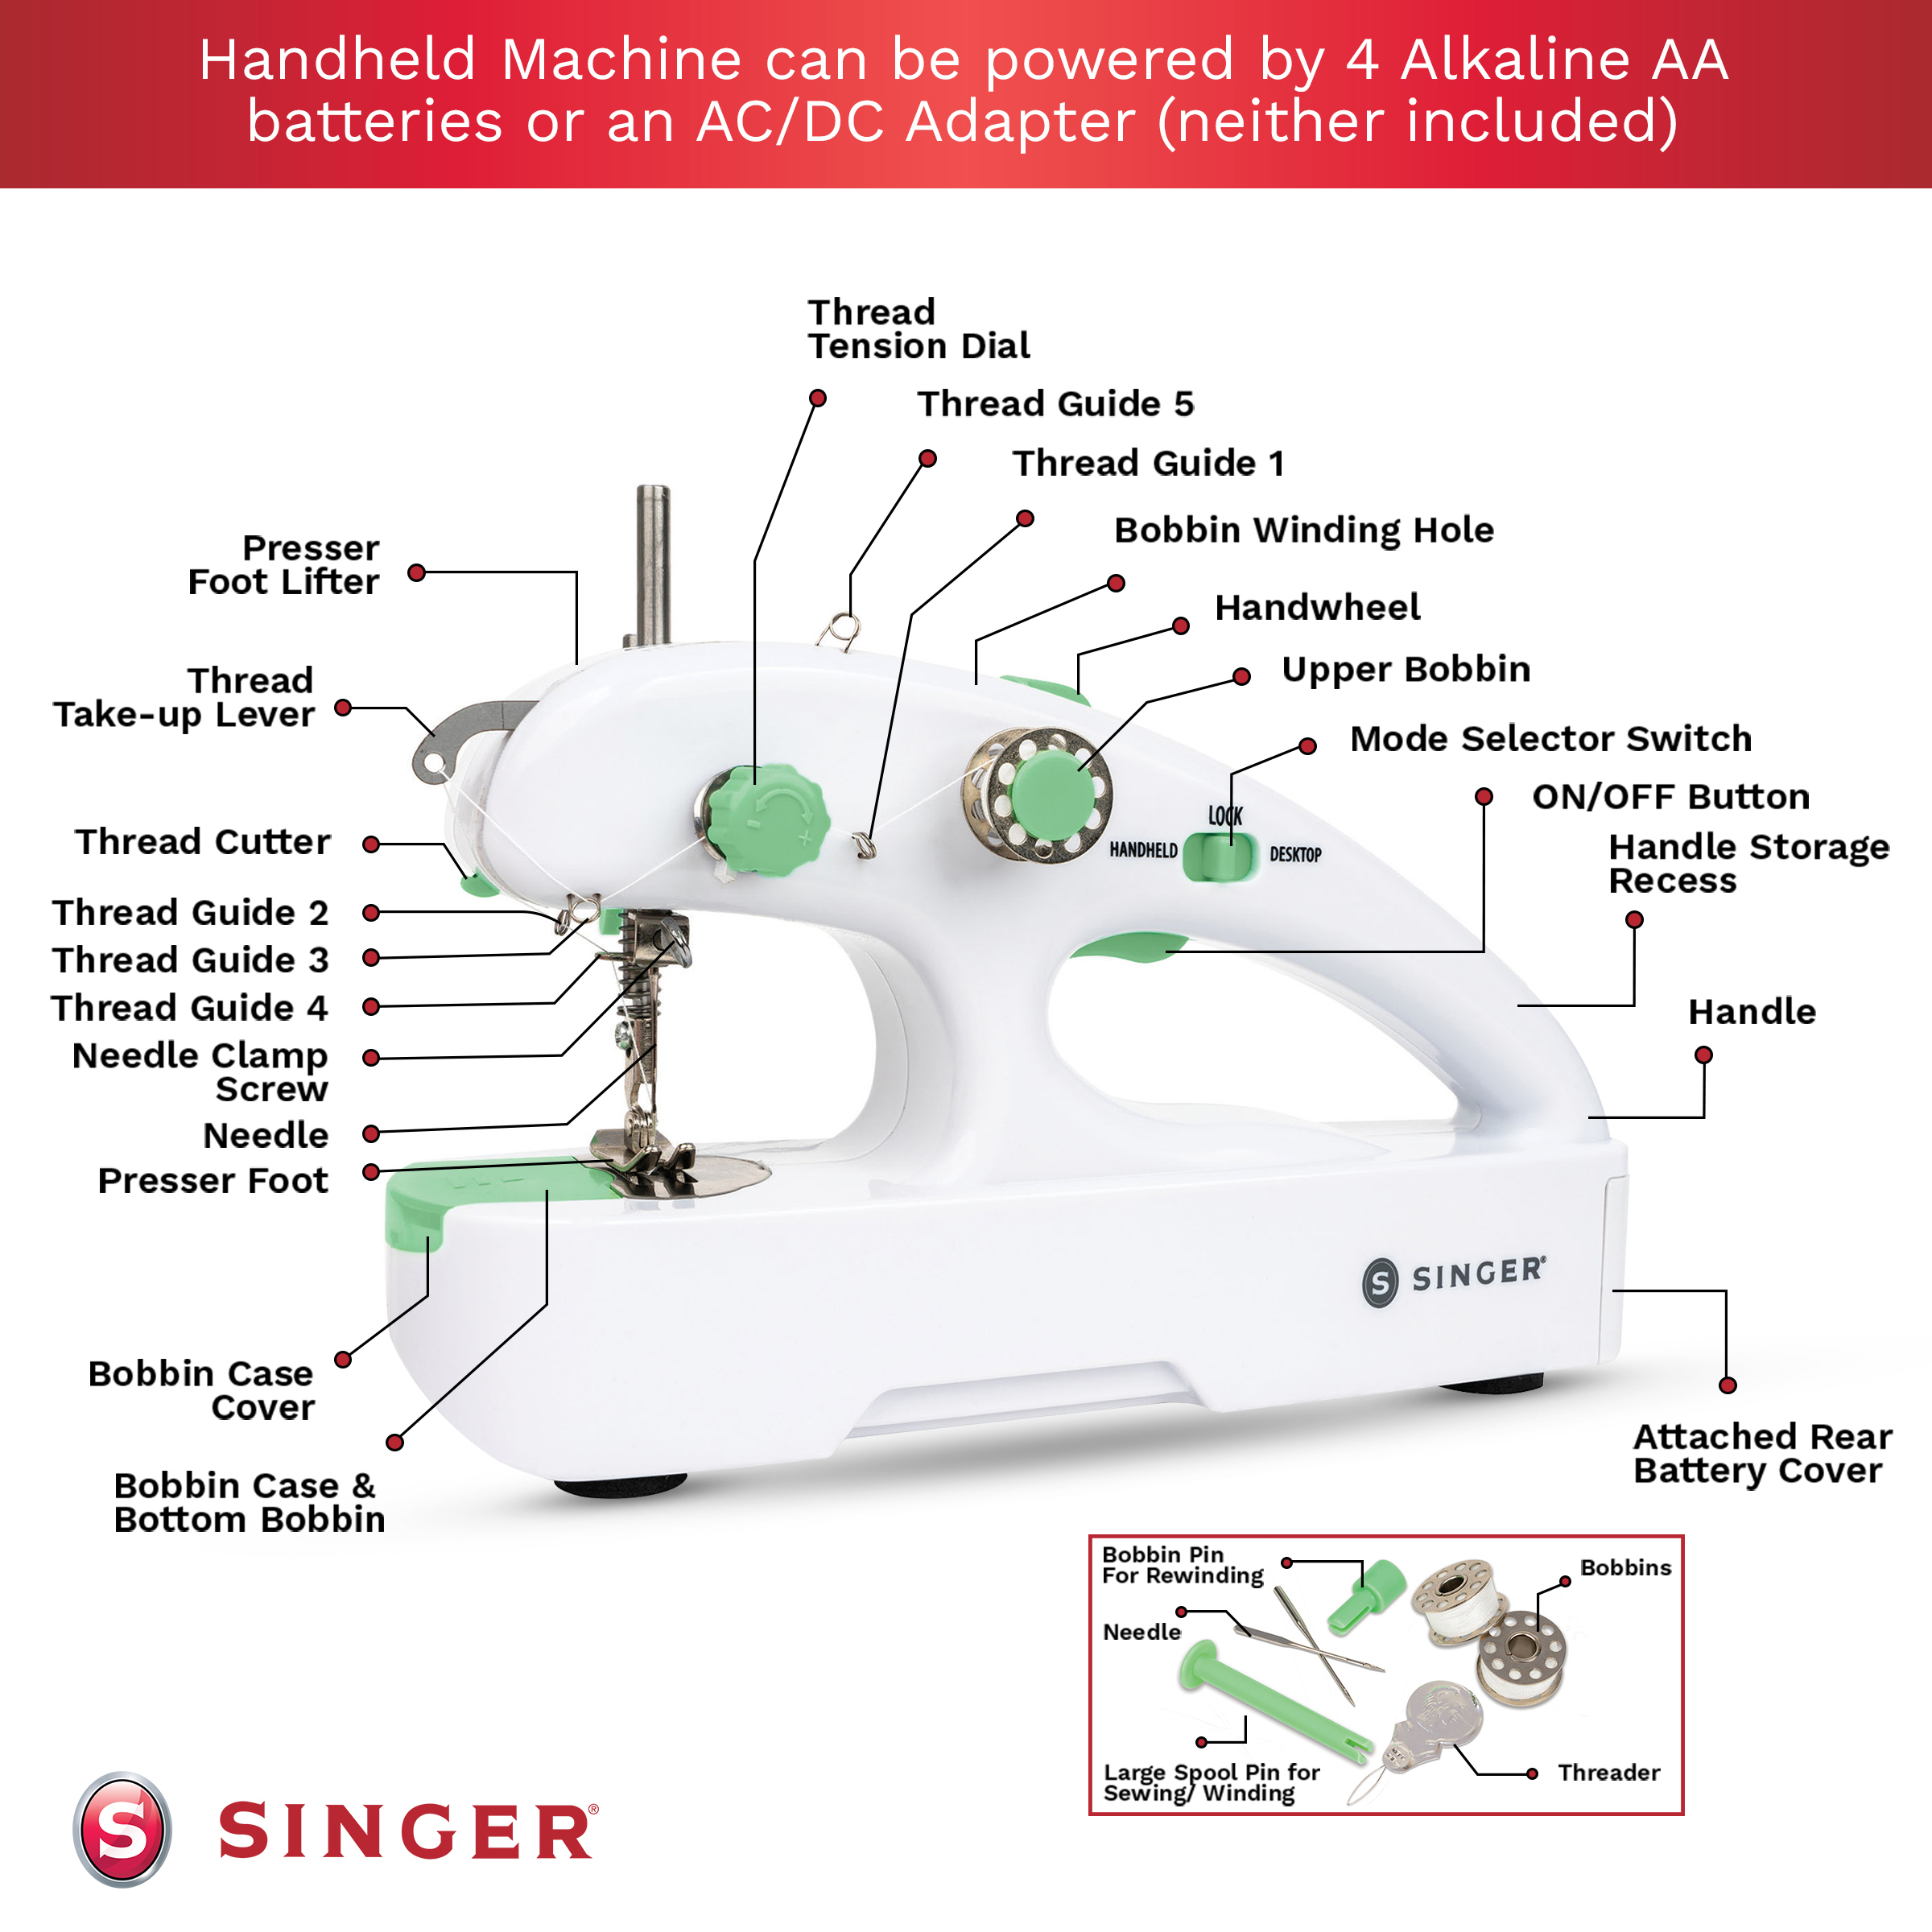 SINGER Stitch Quick Plus Cordless Hand Held Mending Portable Sewing Machine, Two Thread - image 11 of 14